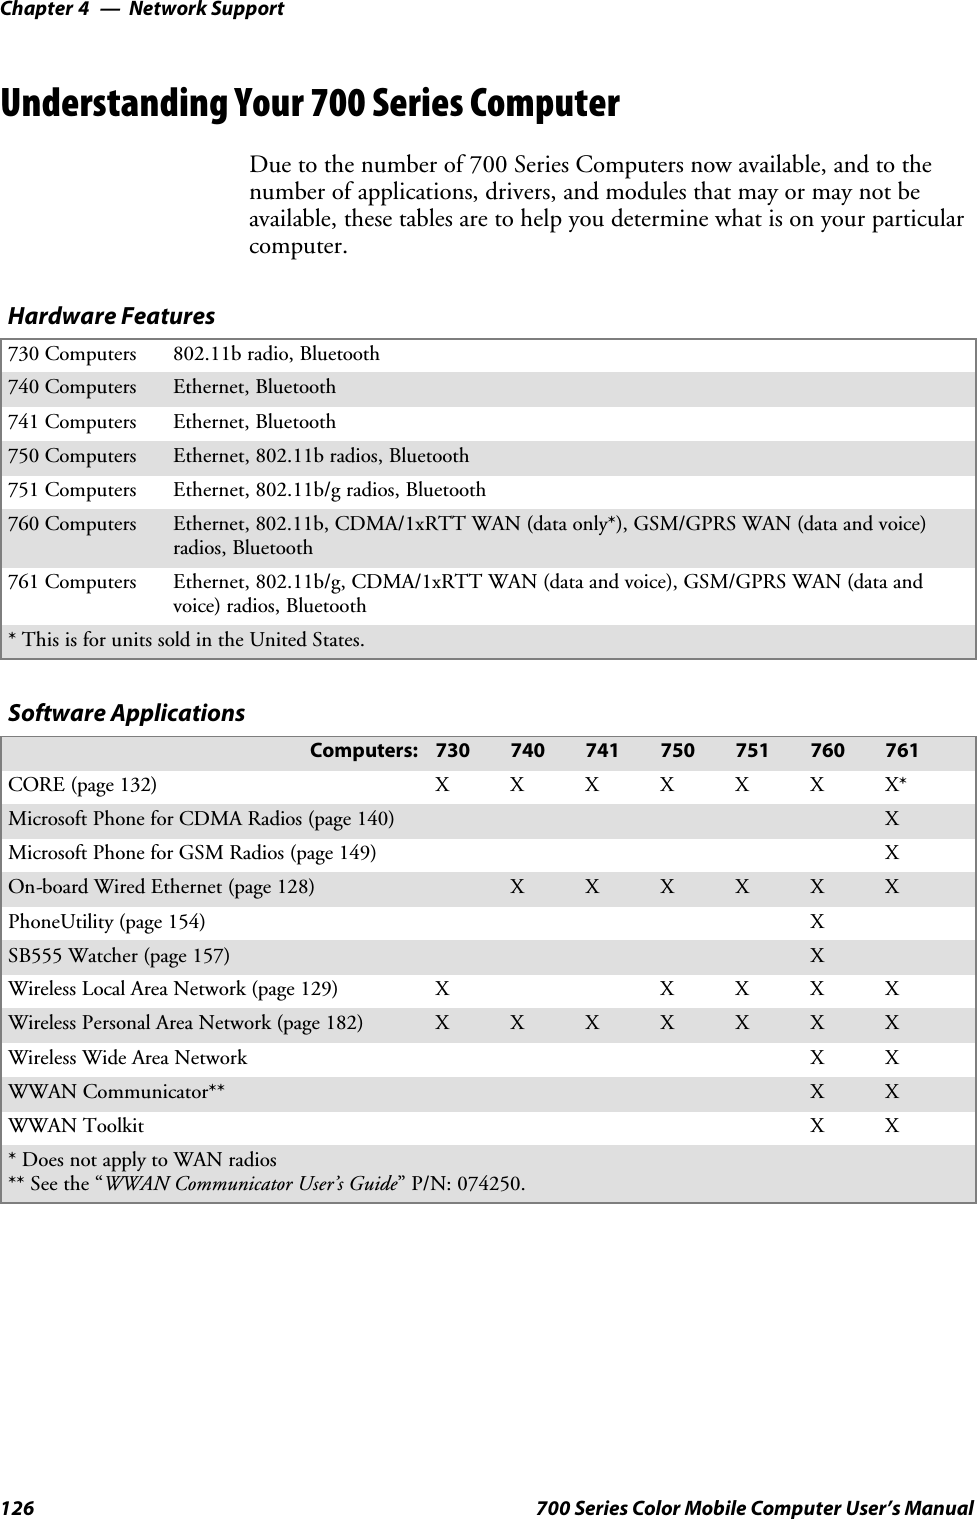 Network SupportChapter —4126 700 Series Color Mobile Computer User’s ManualUnderstanding Your 700 Series ComputerDue to the number of 700 Series Computers now available, and to thenumber of applications, drivers, and modules that may or may not beavailable, these tables are to help you determine what is on your particularcomputer.Hardware Features730 Computers 802.11b radio, Bluetooth740 Computers Ethernet, Bluetooth741 Computers Ethernet, Bluetooth750 Computers Ethernet, 802.11b radios, Bluetooth751 Computers Ethernet, 802.11b/g radios, Bluetooth760 Computers Ethernet, 802.11b, CDMA/1xRTT WAN (data only*), GSM/GPRS WAN (data and voice)radios, Bluetooth761 Computers Ethernet, 802.11b/g, CDMA/1xRTT WAN (data and voice), GSM/GPRS WAN (data andvoice) radios, Bluetooth*ThisisforunitssoldintheUnitedStates.Software ApplicationsComputers: 730 740 741 750 751 760 761CORE (page 132) XXXXXXX*Microsoft Phone for CDMA Radios (page 140) XMicrosoft Phone for GSM Radios (page 149) XOn-board Wired Ethernet (page 128) XXXXXXPhoneUtility (page 154) XSB555 Watcher (page 157) XWireless Local Area Network (page 129) X XXXXWireless Personal Area Network (page 182) XXXXXXXWireless Wide Area Network XXWWAN Communicator** X XWWAN Toolkit XX* Does not apply to WAN radios** See the “WWAN Communicator User’s Guide” P/N: 074250.